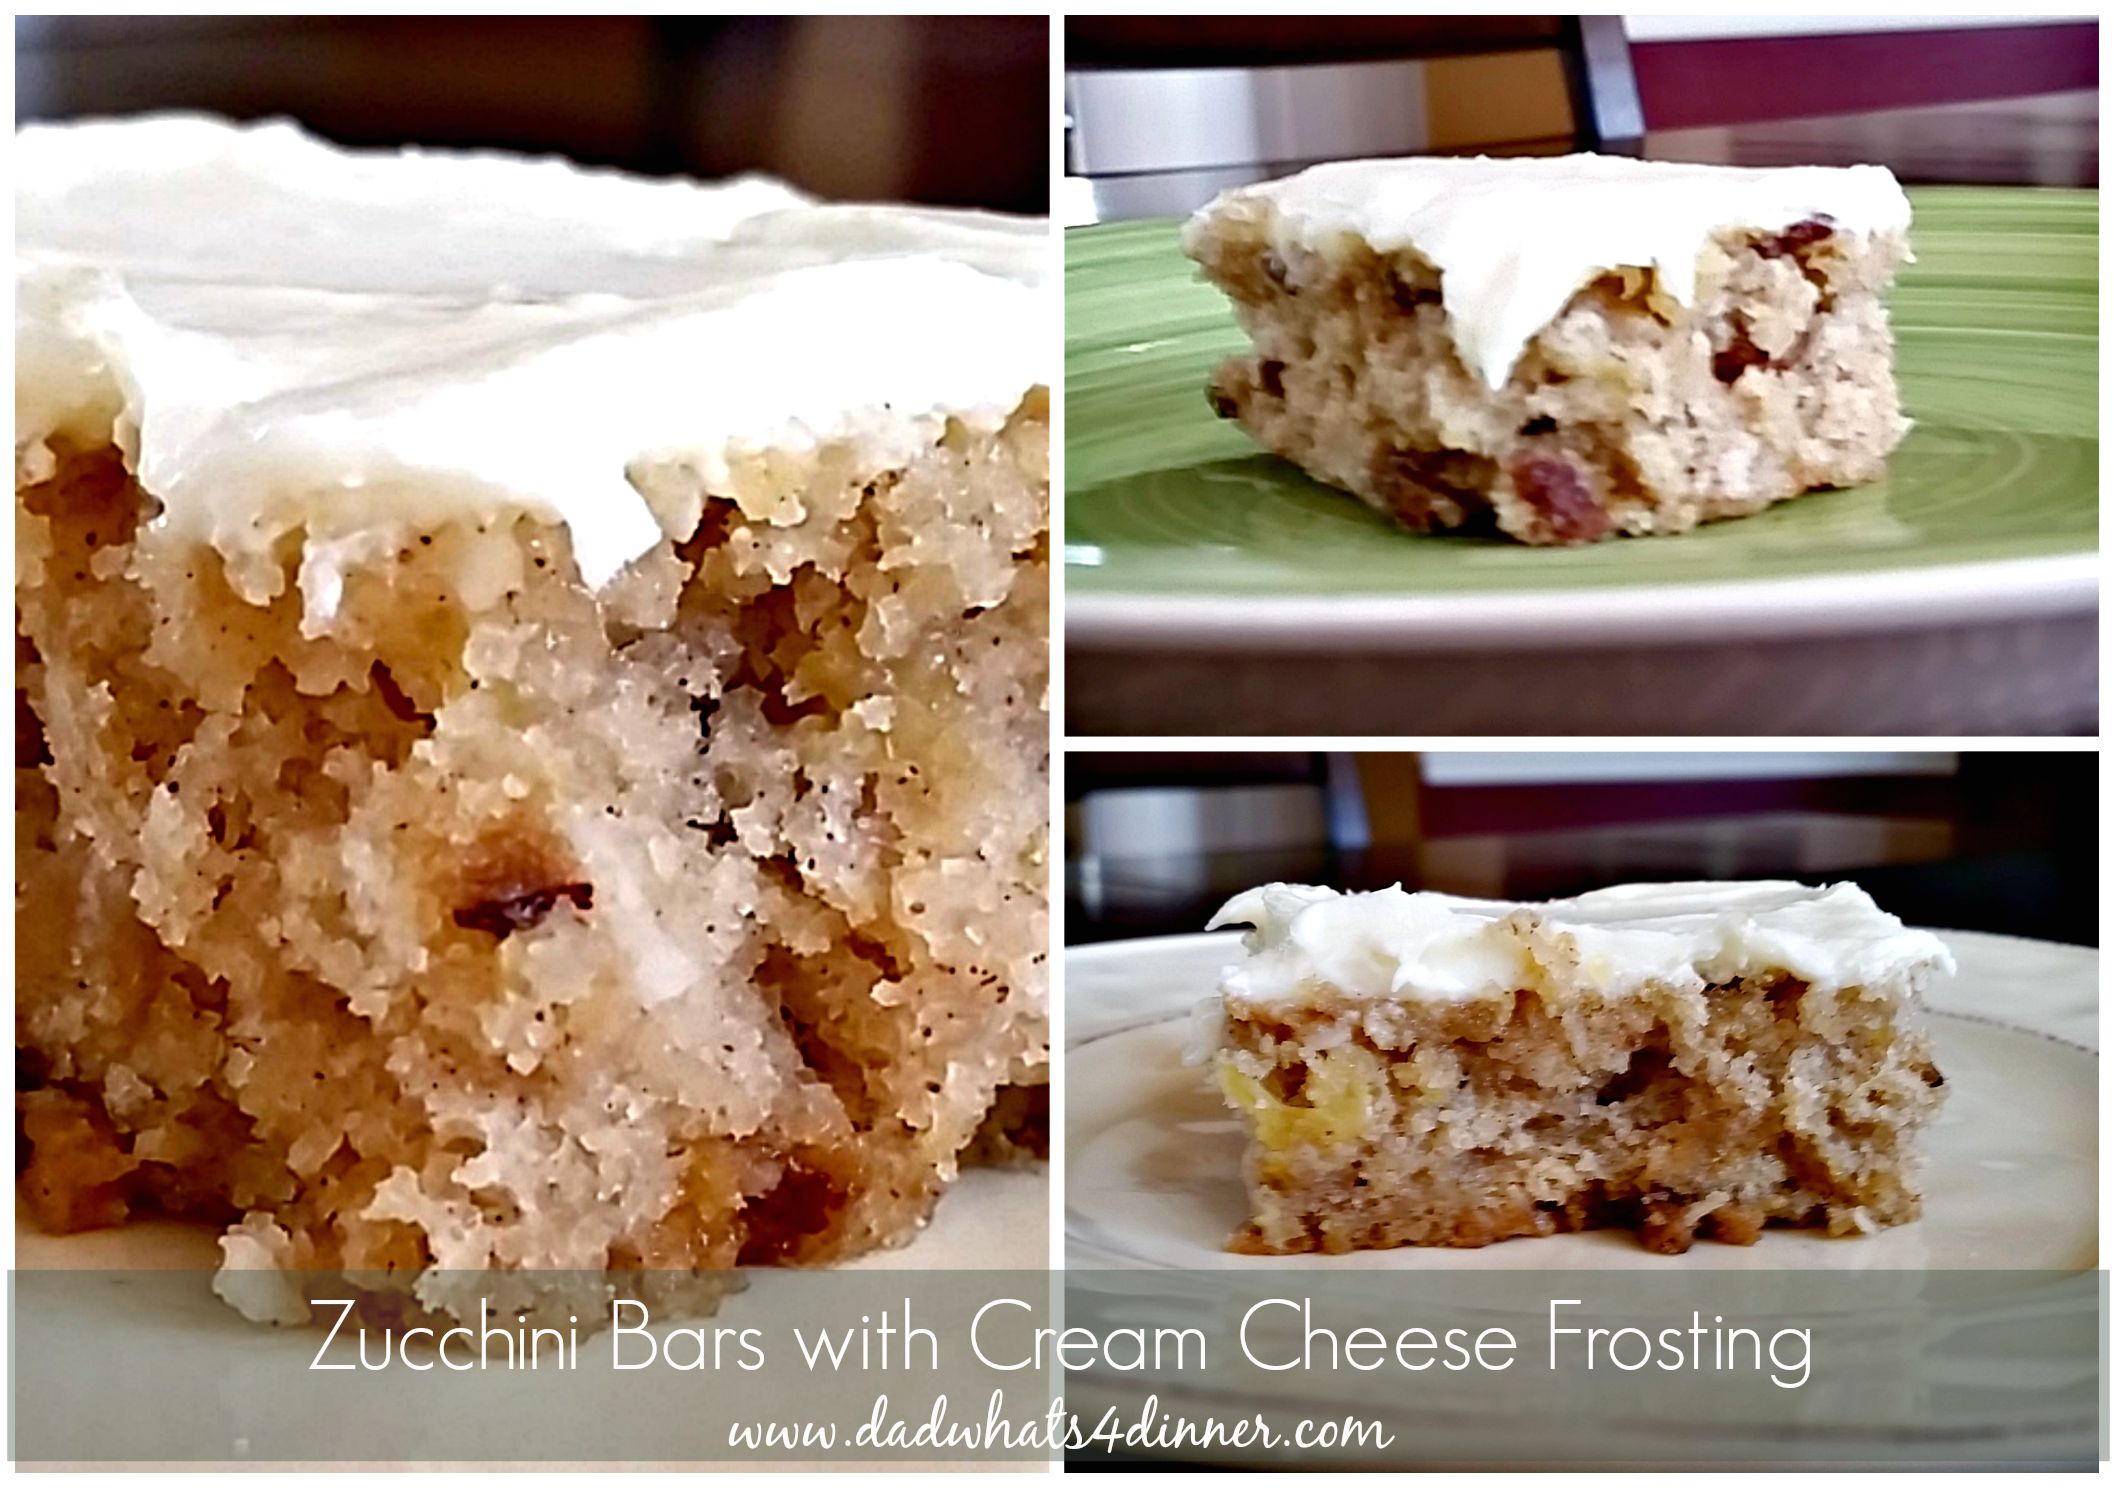 What to do...What to do...What to do with all that extra zucchini?  Well this recipe will make you want to grow more just so you can make these Zucchini Bars with Cream Cheese Frosting. Very easy and the kids will never know the recipe includes zucchini.